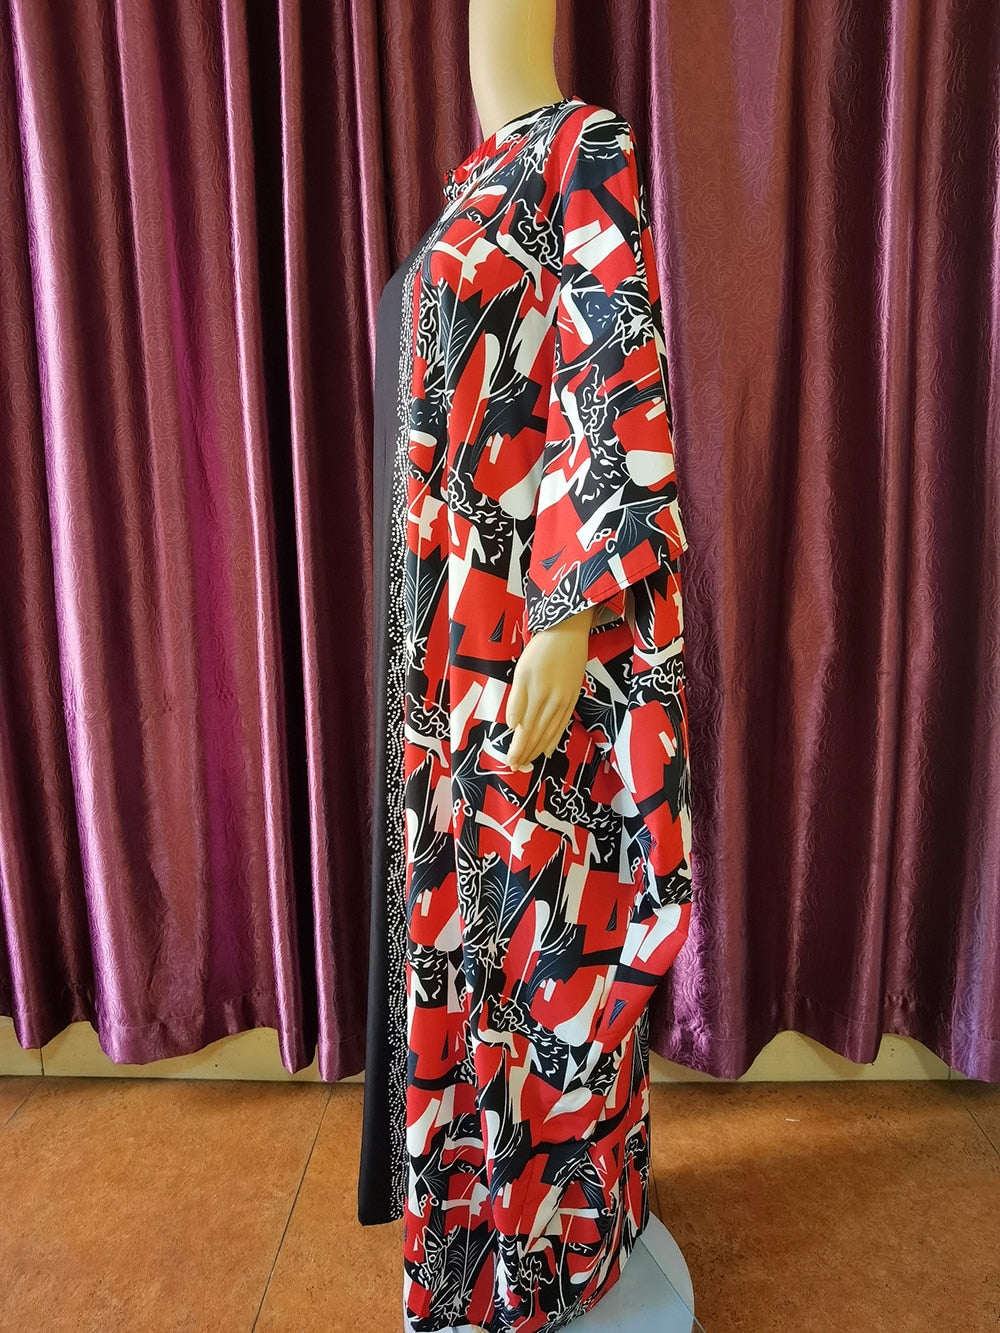 Plus Size Print African Maxi Dresses Traditional Dashiki Kaftan Robe Elegant Wedding Party Dress - Flexi Africa - Flexi Africa offers Free Delivery Worldwide - Vibrant African traditional clothing showcasing bold prints and intricate designs